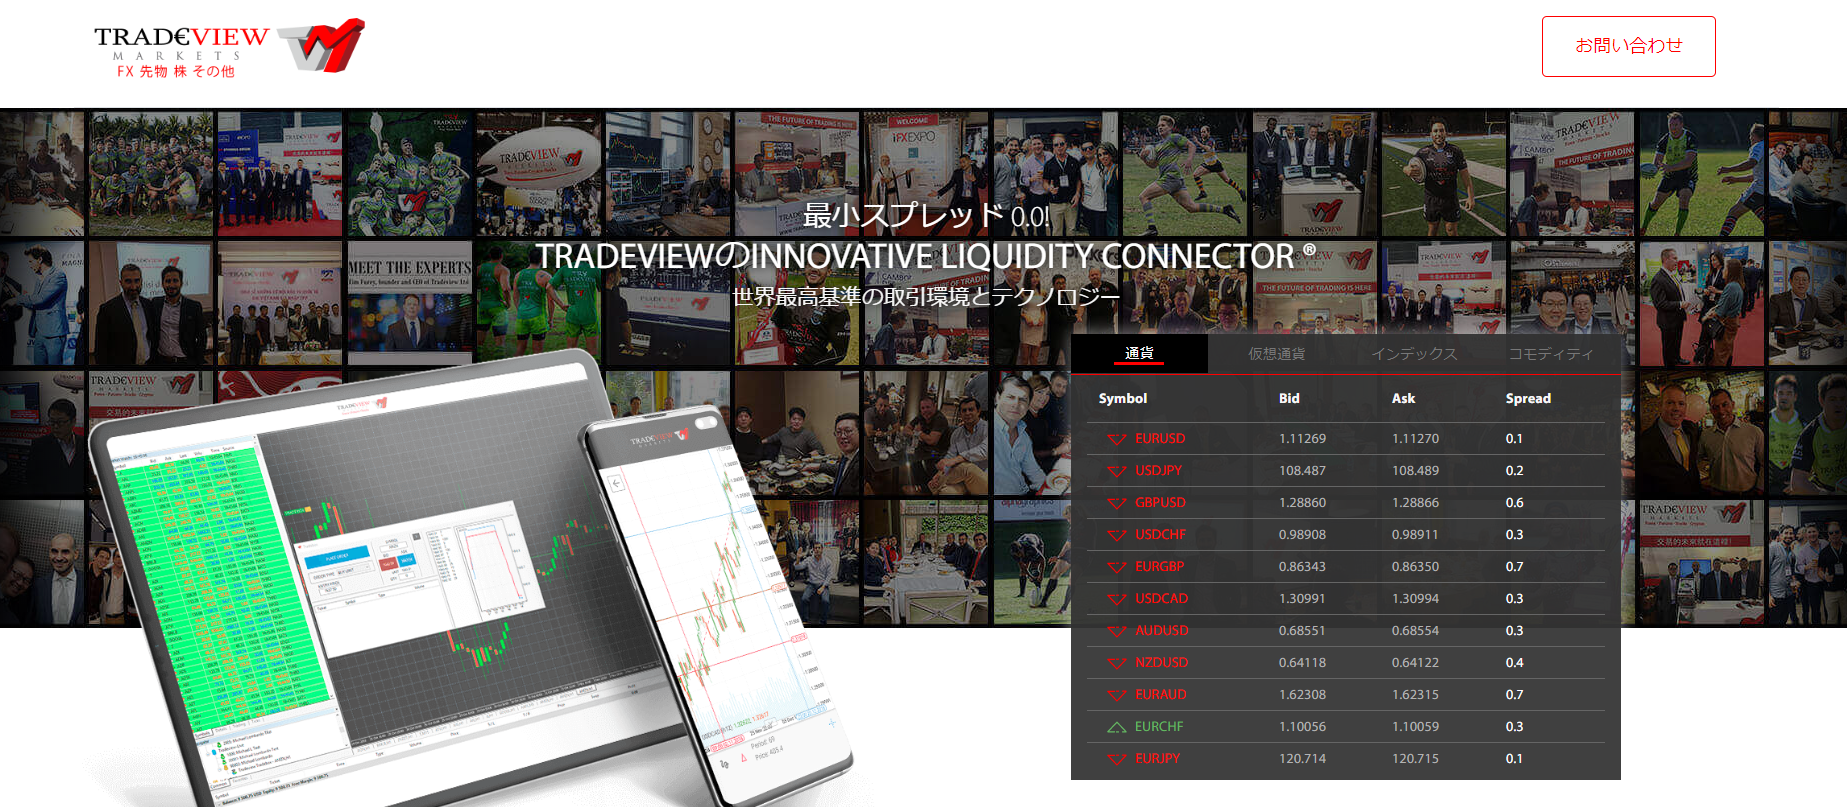 Tradeview公式サイト - Tradeviewのメリットとデメリット